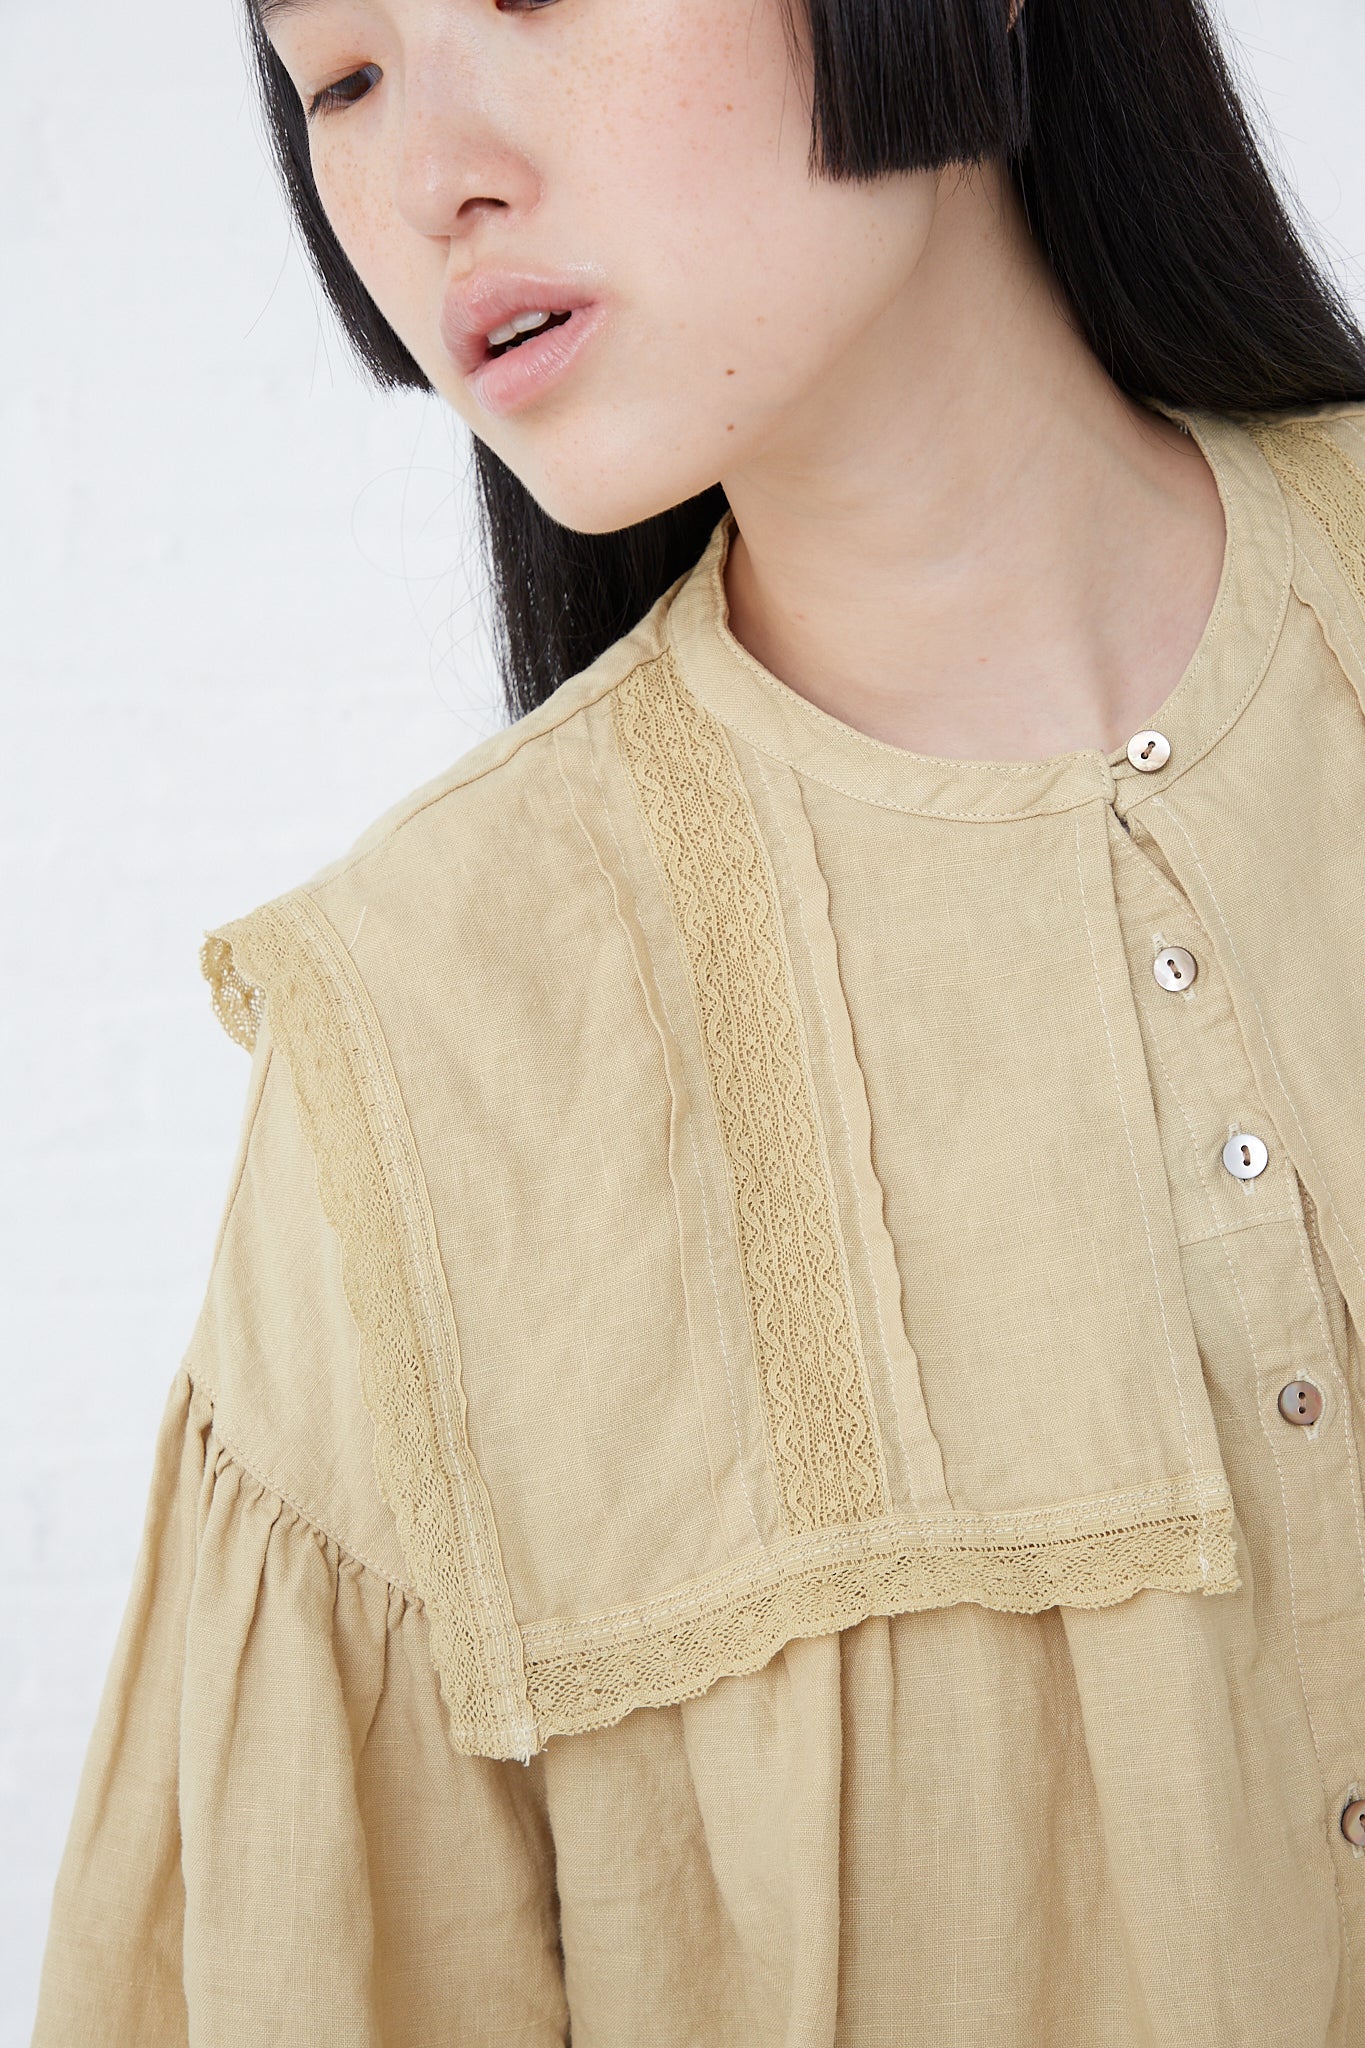 A woman wearing a Natural Dyed Linen Lace Blouse in Yellow crafted from nest Robe.